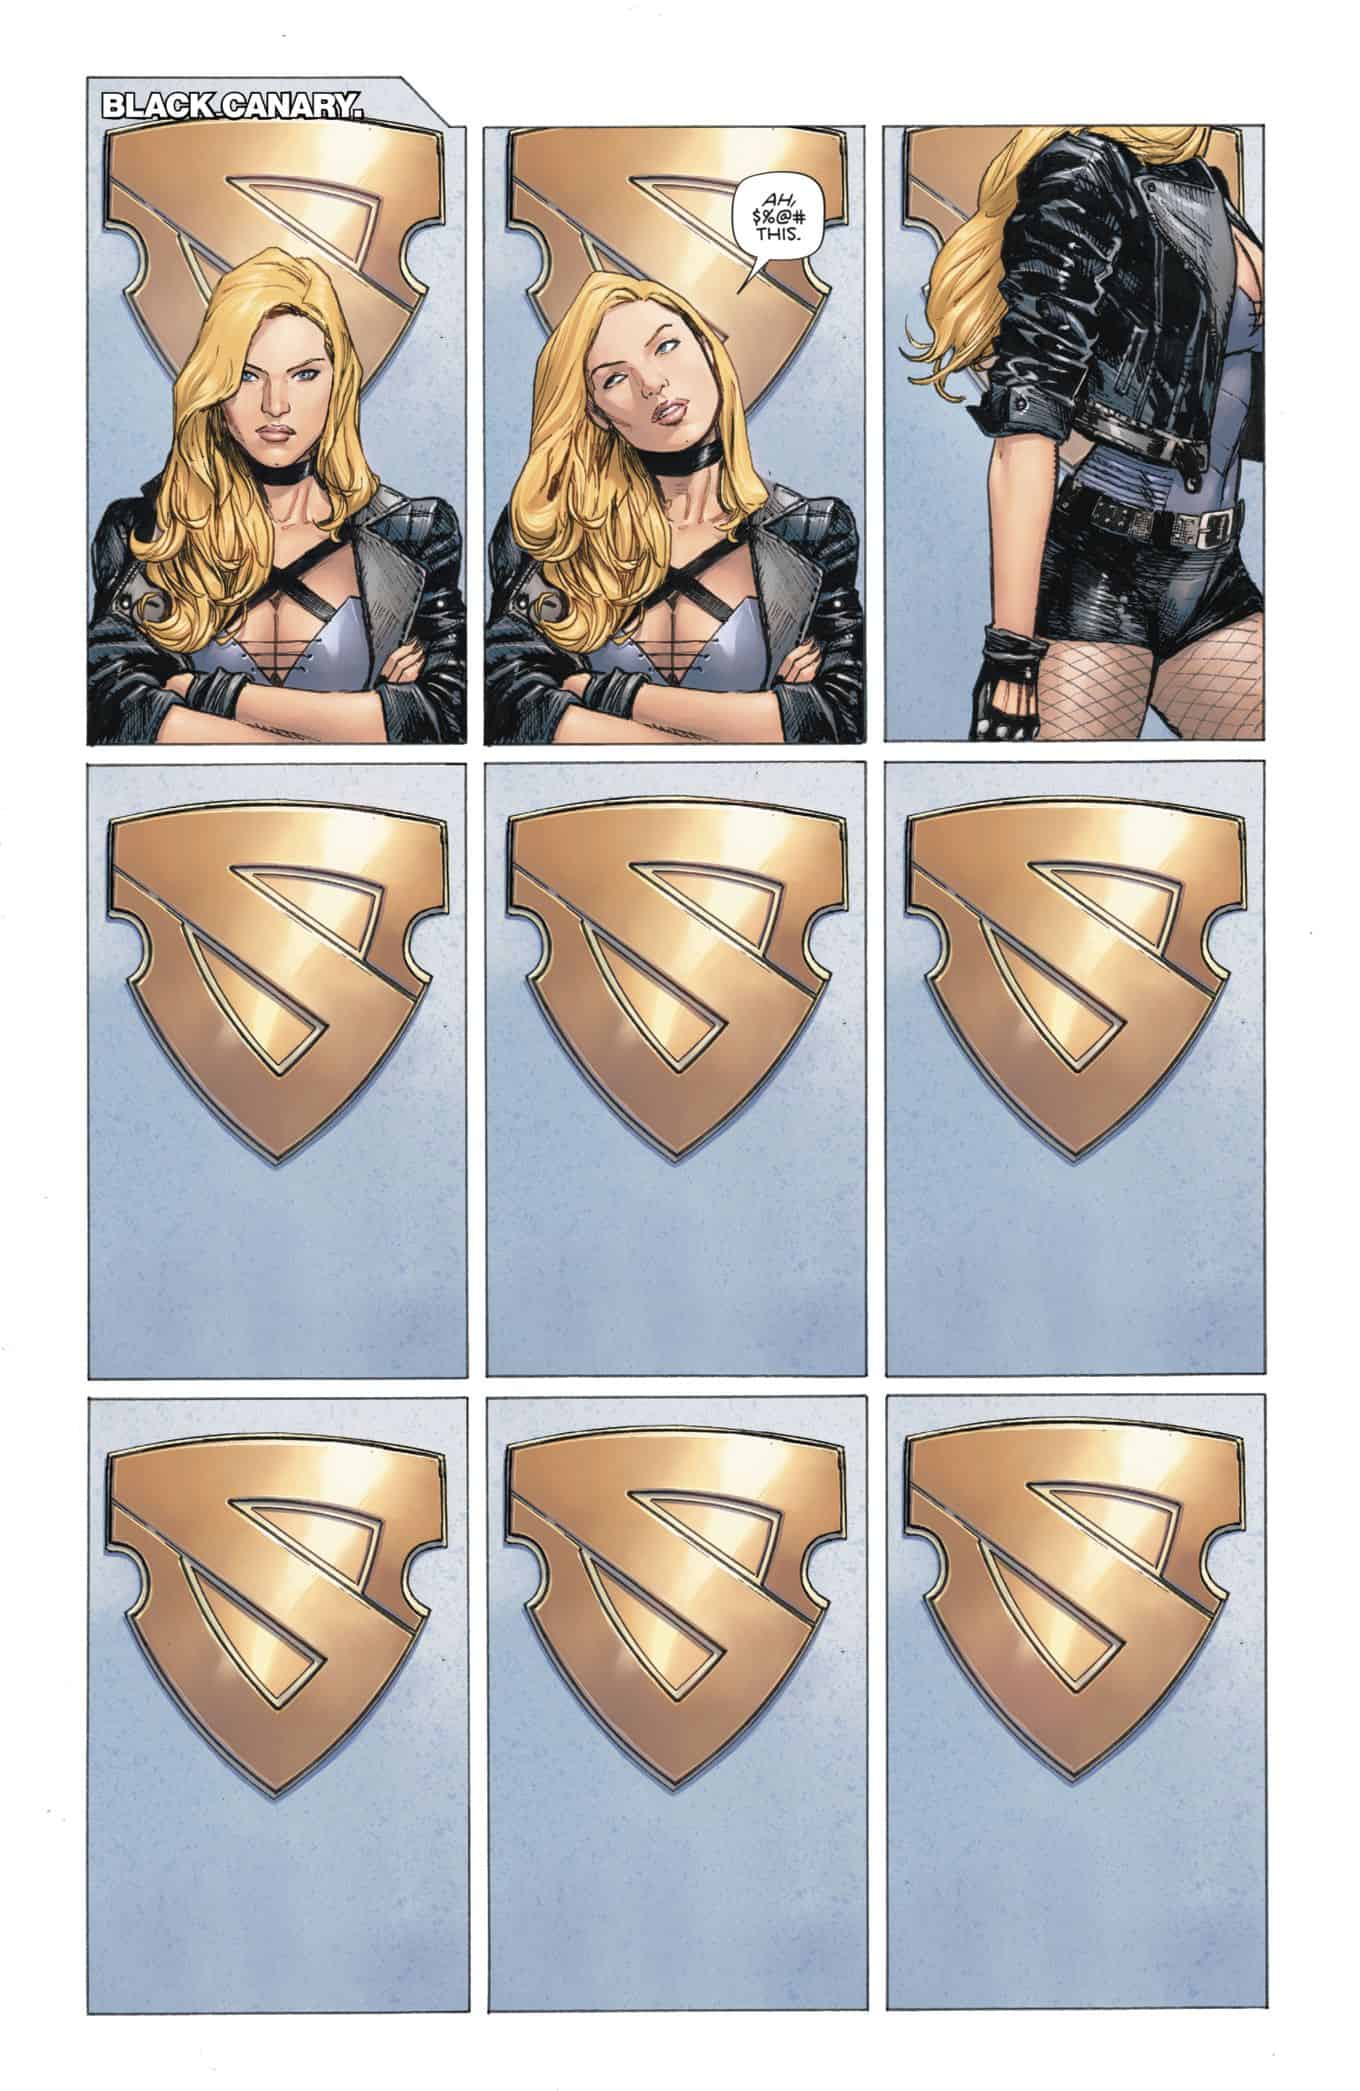 Heroes-In-Crisis-4-Confessional-2-Black-Canary.jpg